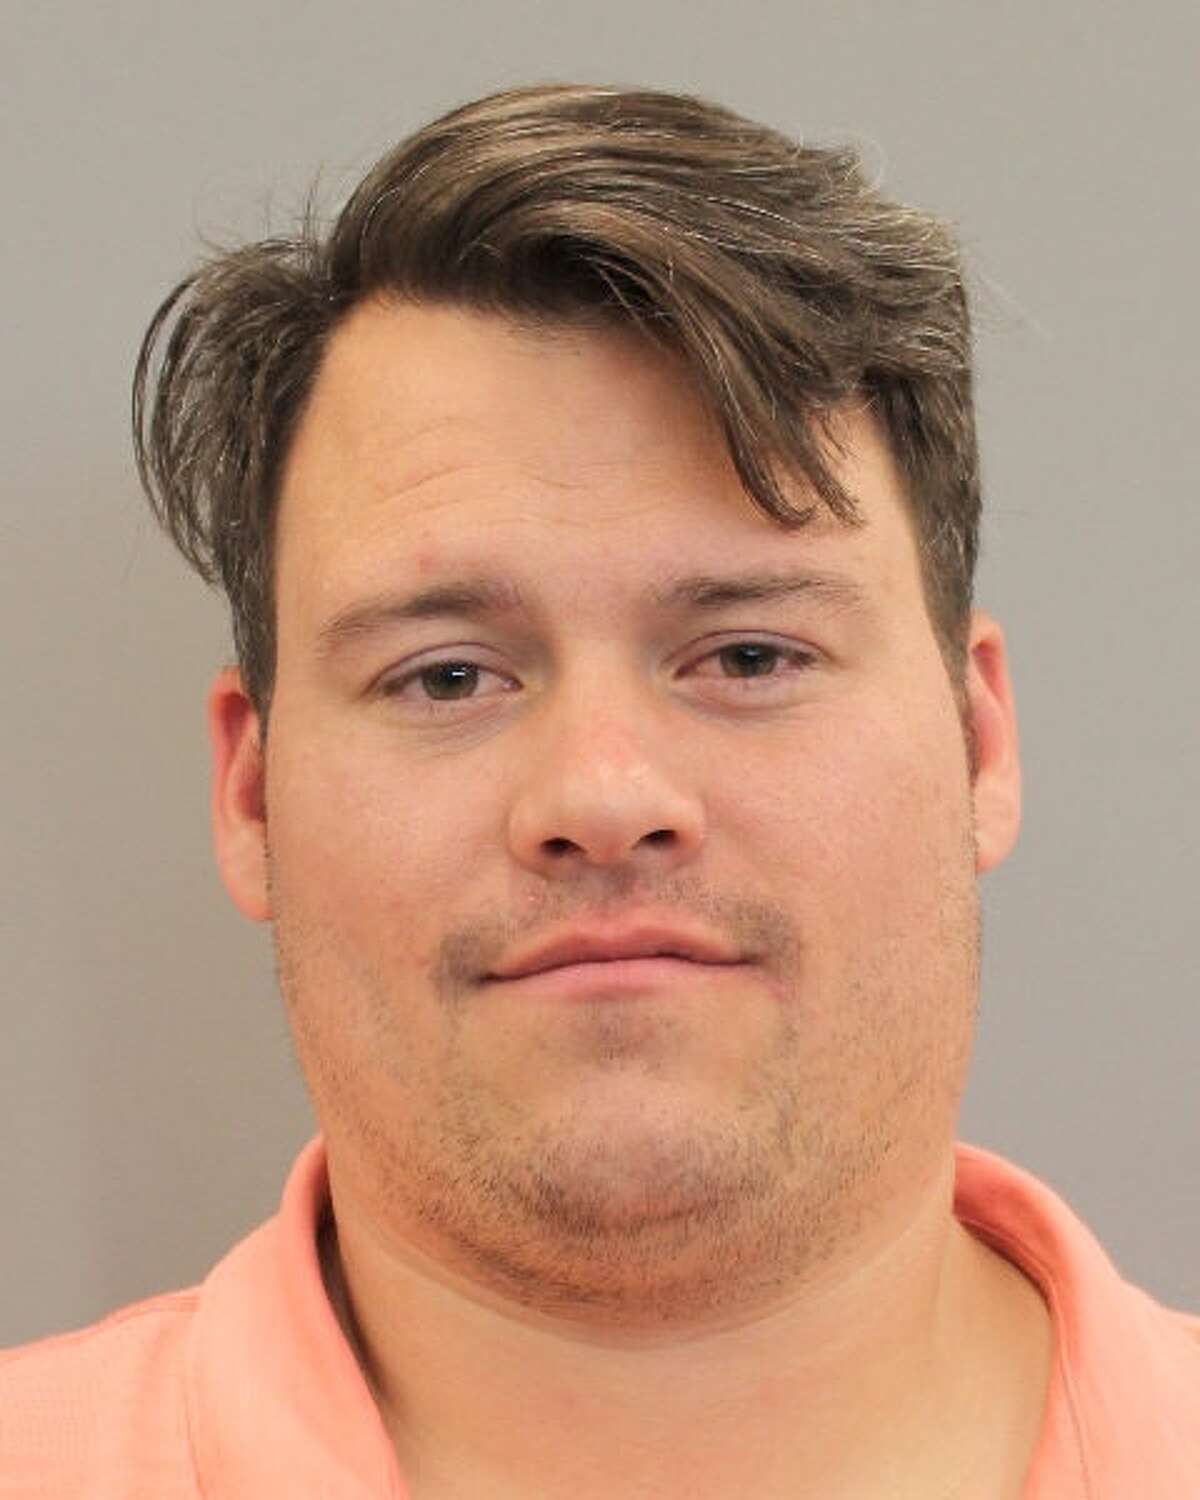 Kory Allen Clemens, 30, son of former Houston Astros pitcher Roger Clemens, was arrested Tuesday, May 21, 2019, on a charge of driving while intoxicated.